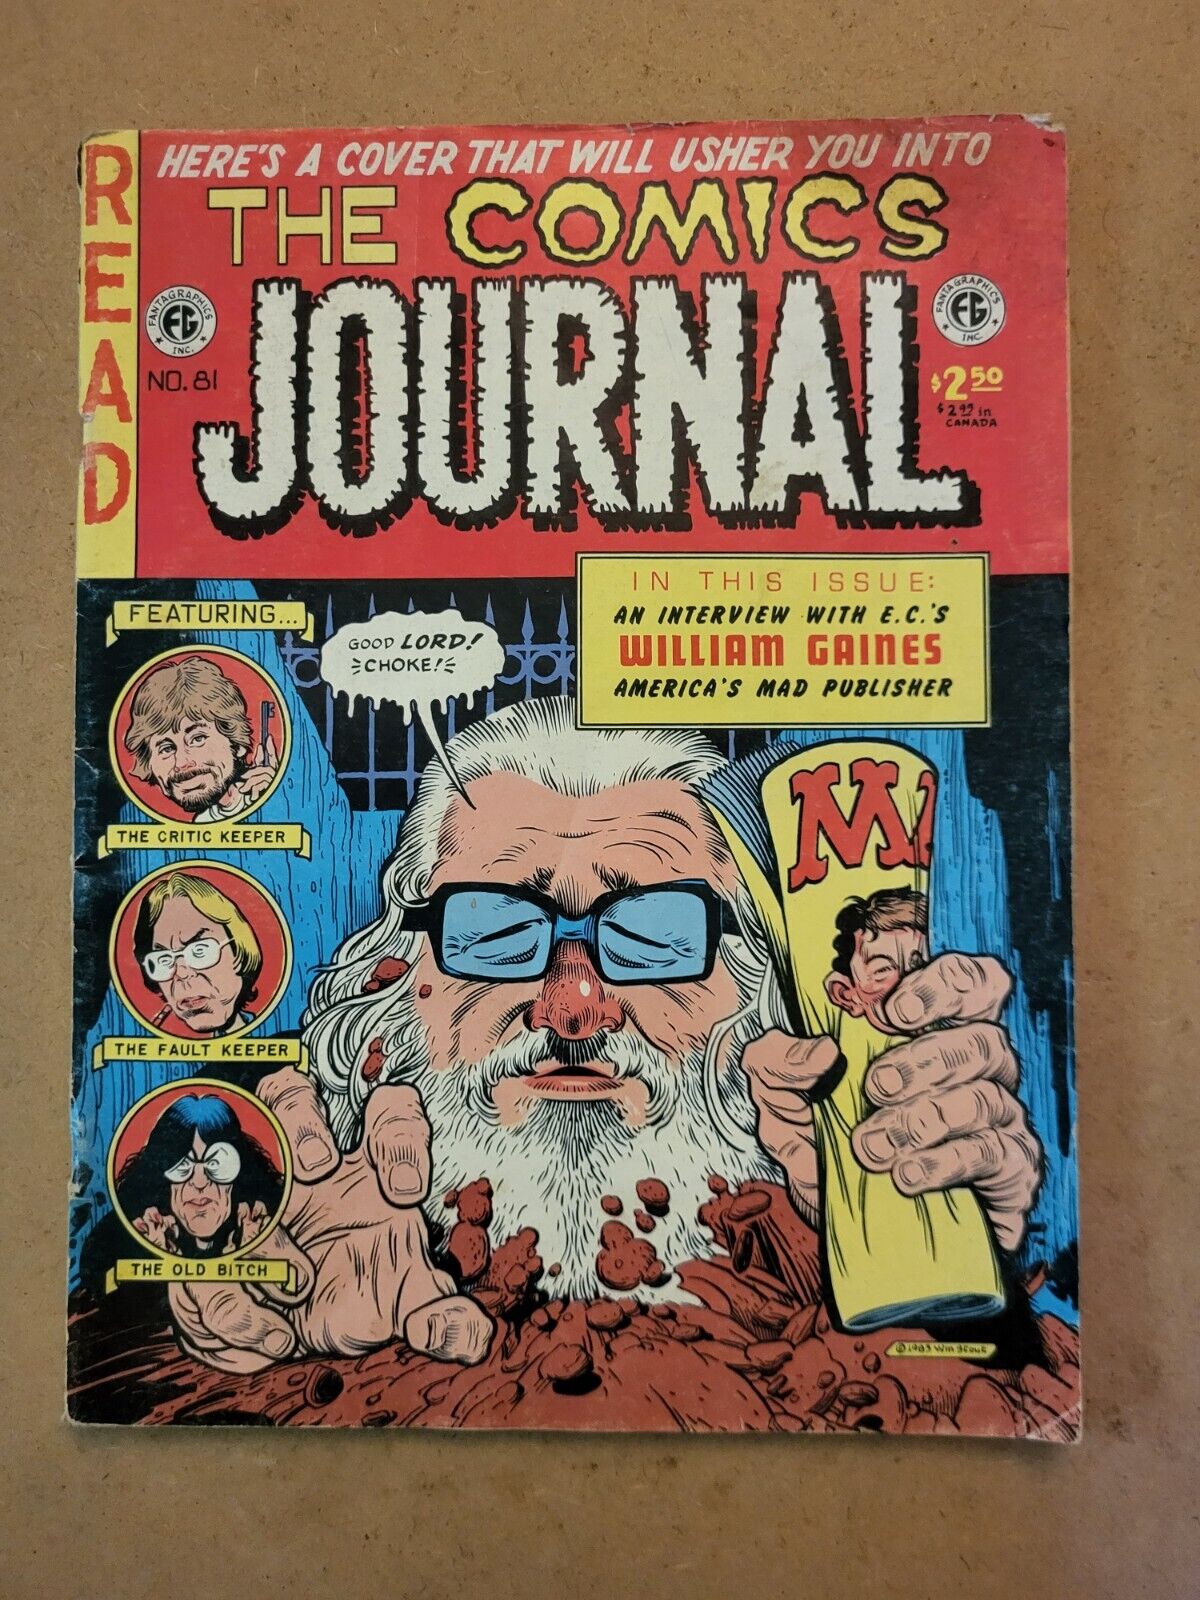 The Comics Journal #81 (1983) William Gaines Interview GREAT EC History VF